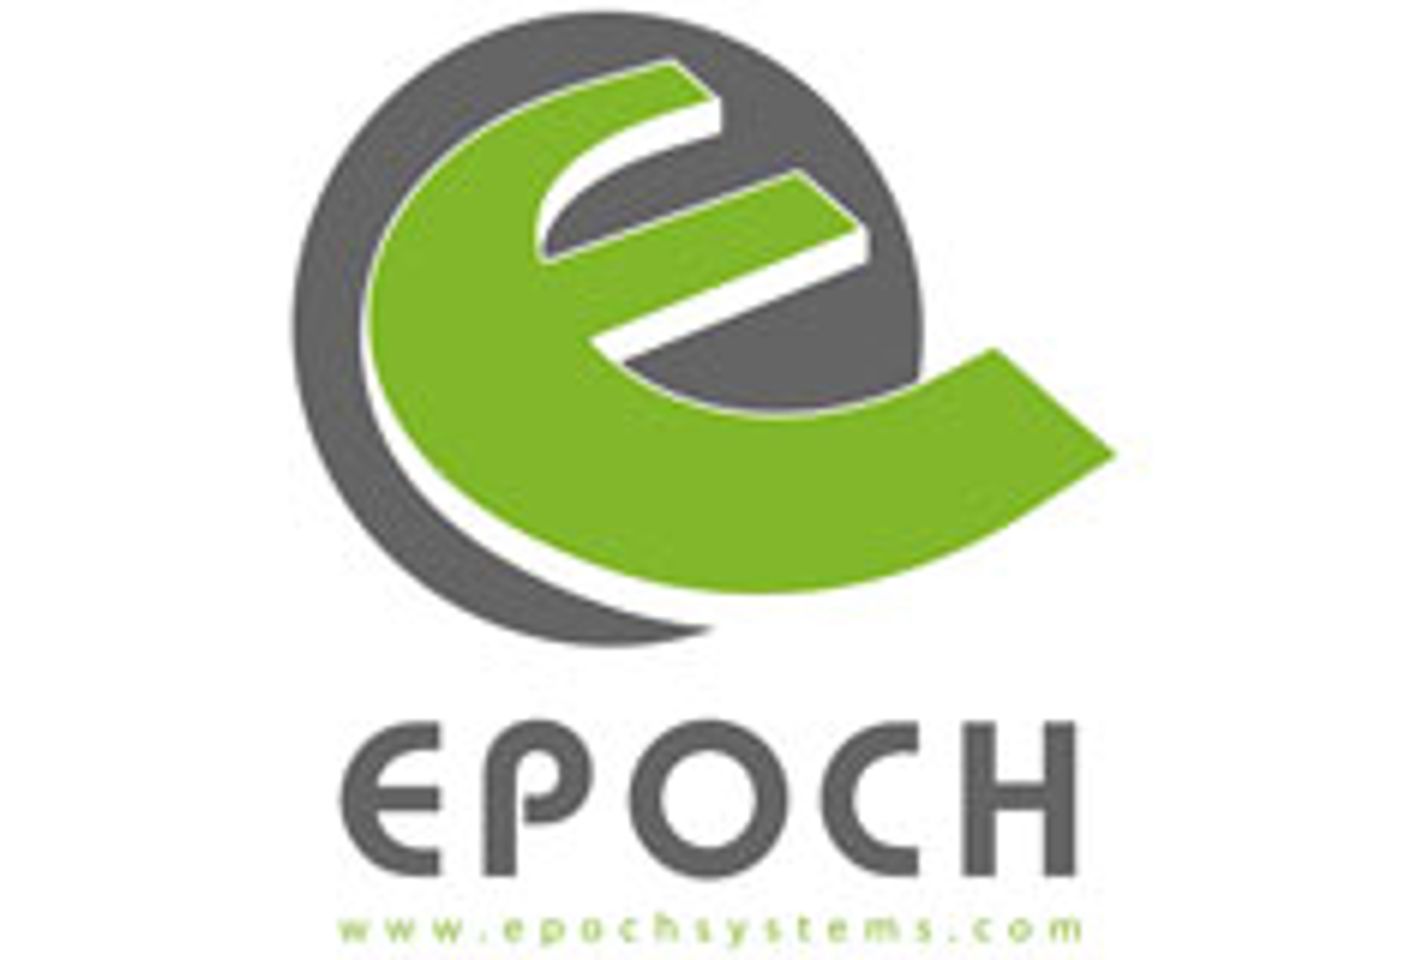 Epoch to Host 10th Anniversary Party During Webmaster Access